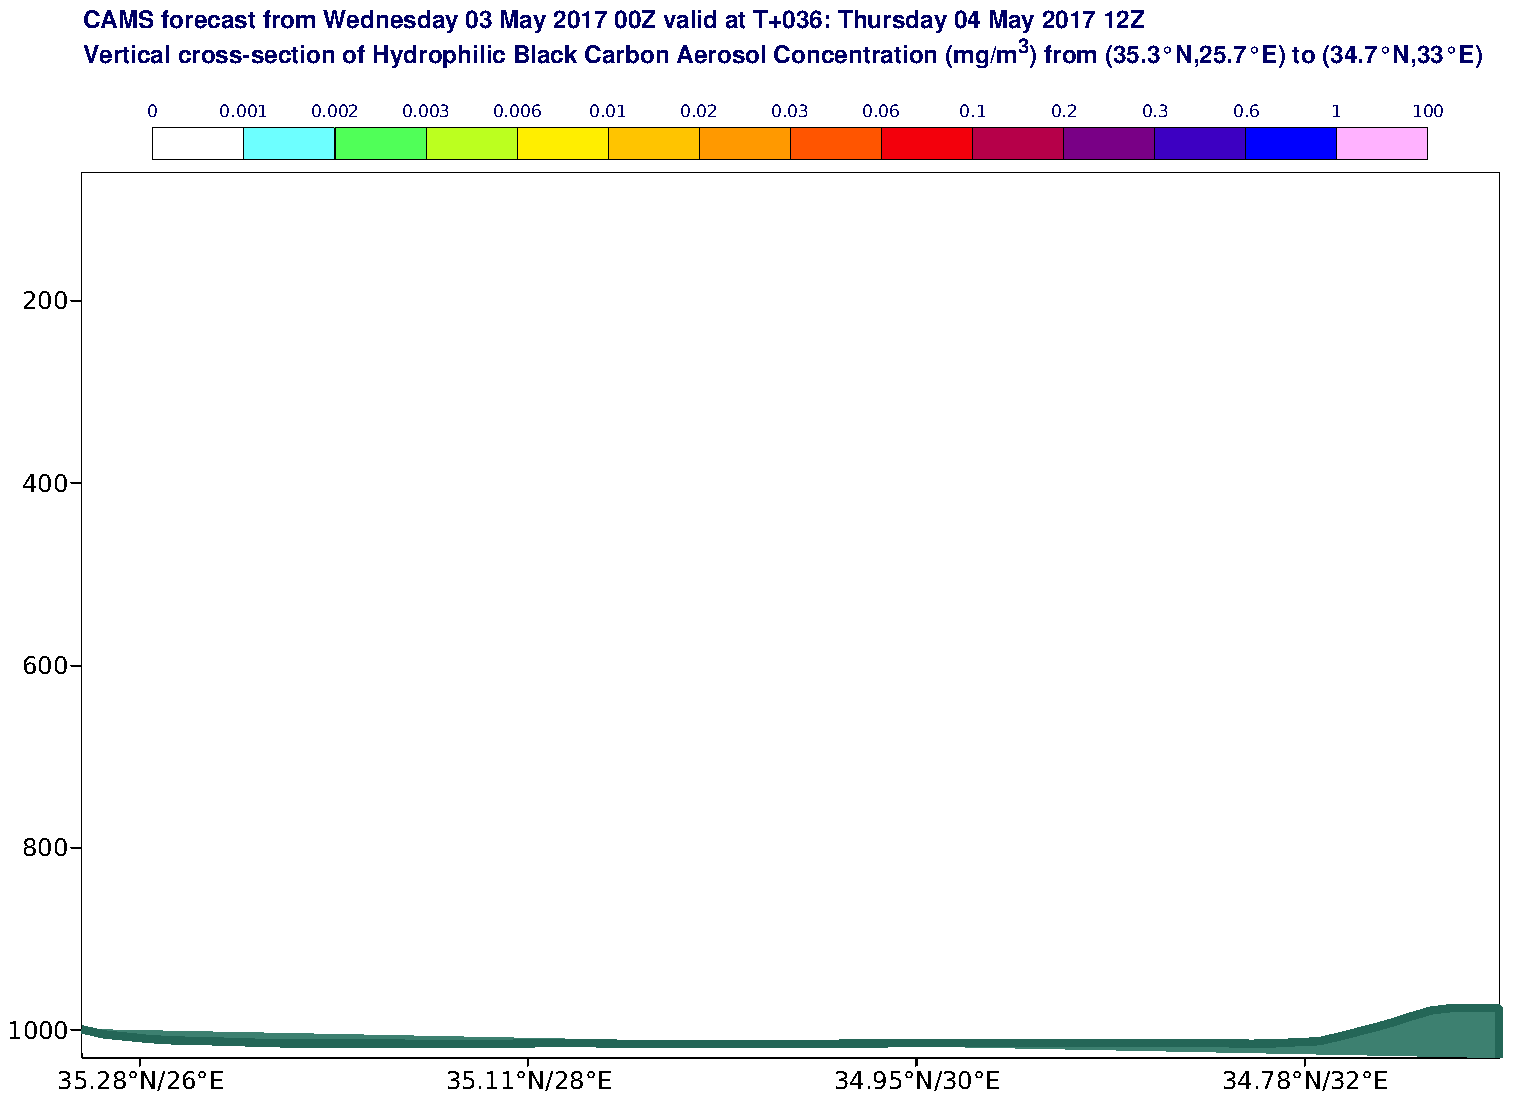 Vertical cross-section of Hydrophilic Black Carbon Aerosol Concentration (mg/m3) valid at T36 - 2017-05-04 12:00